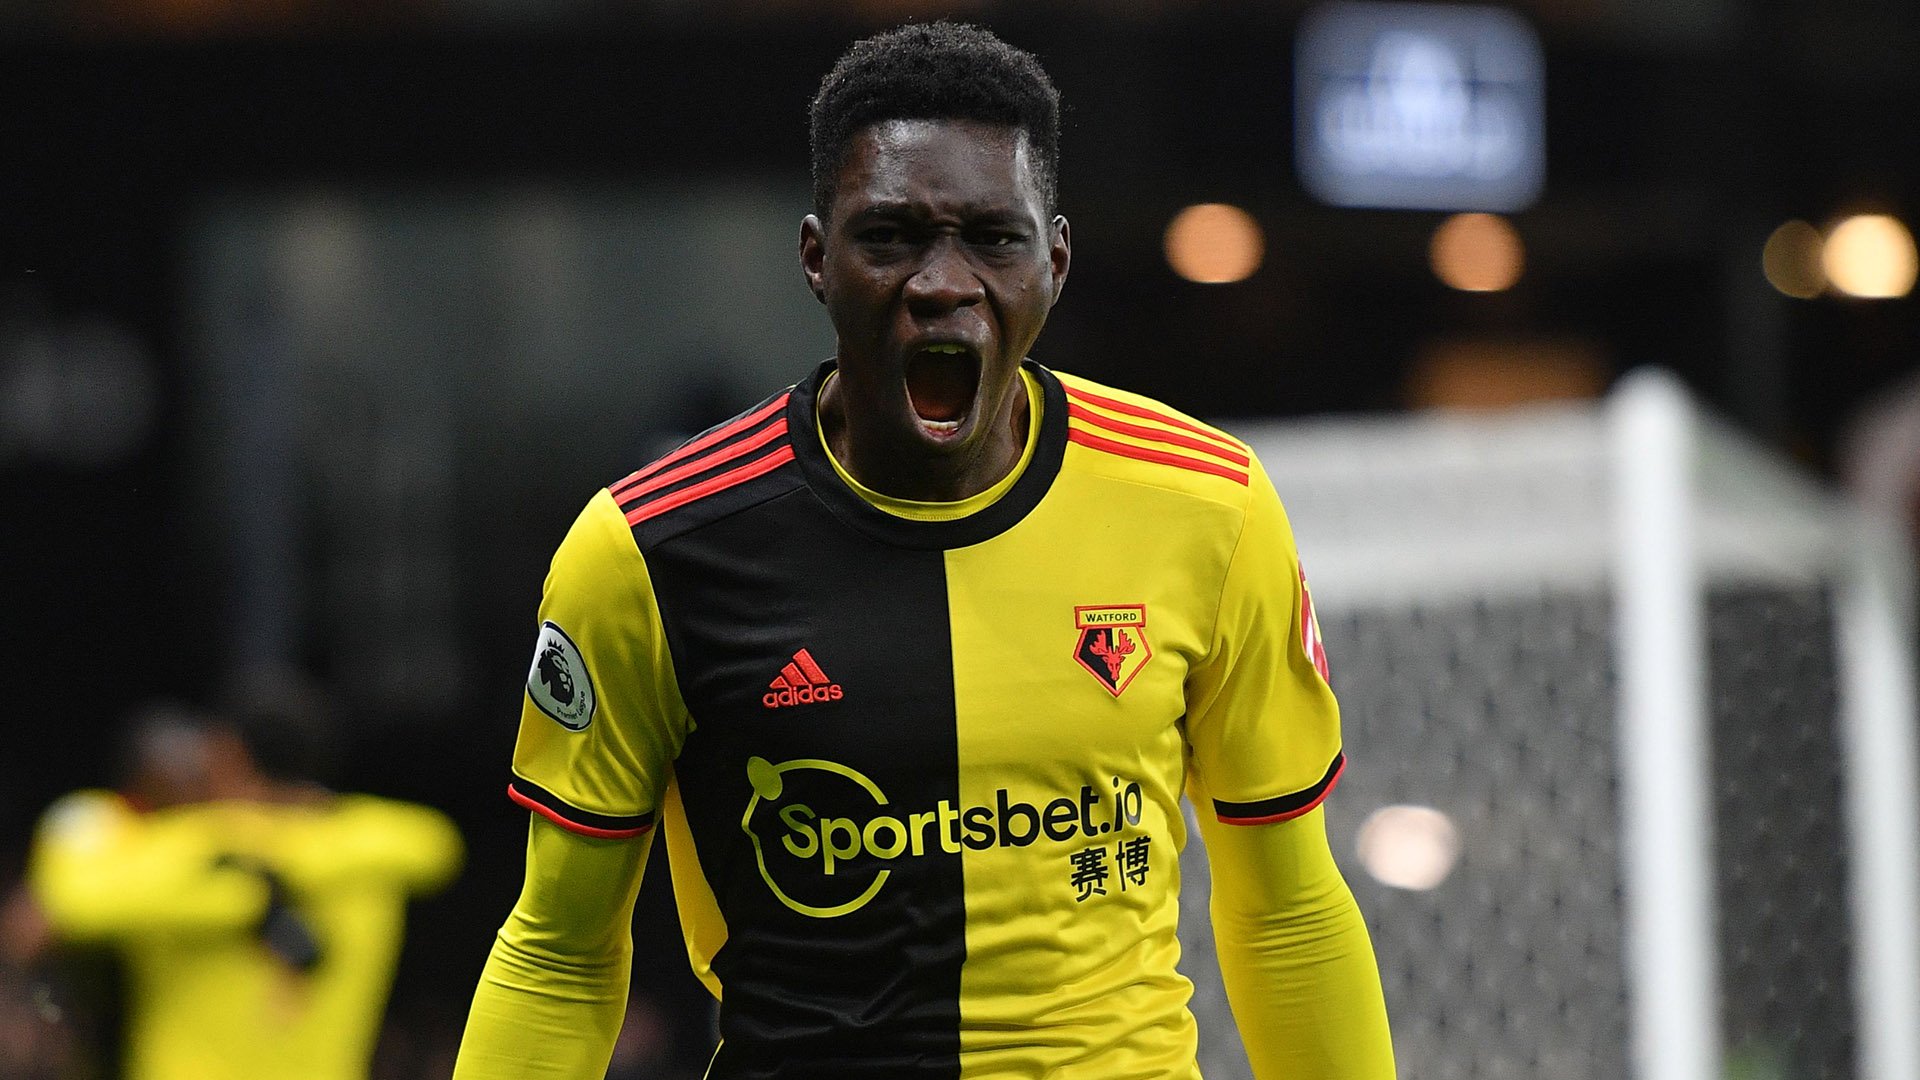 Ismaila Sarr among the list of players set to be out on the sidelines against Tottenham.